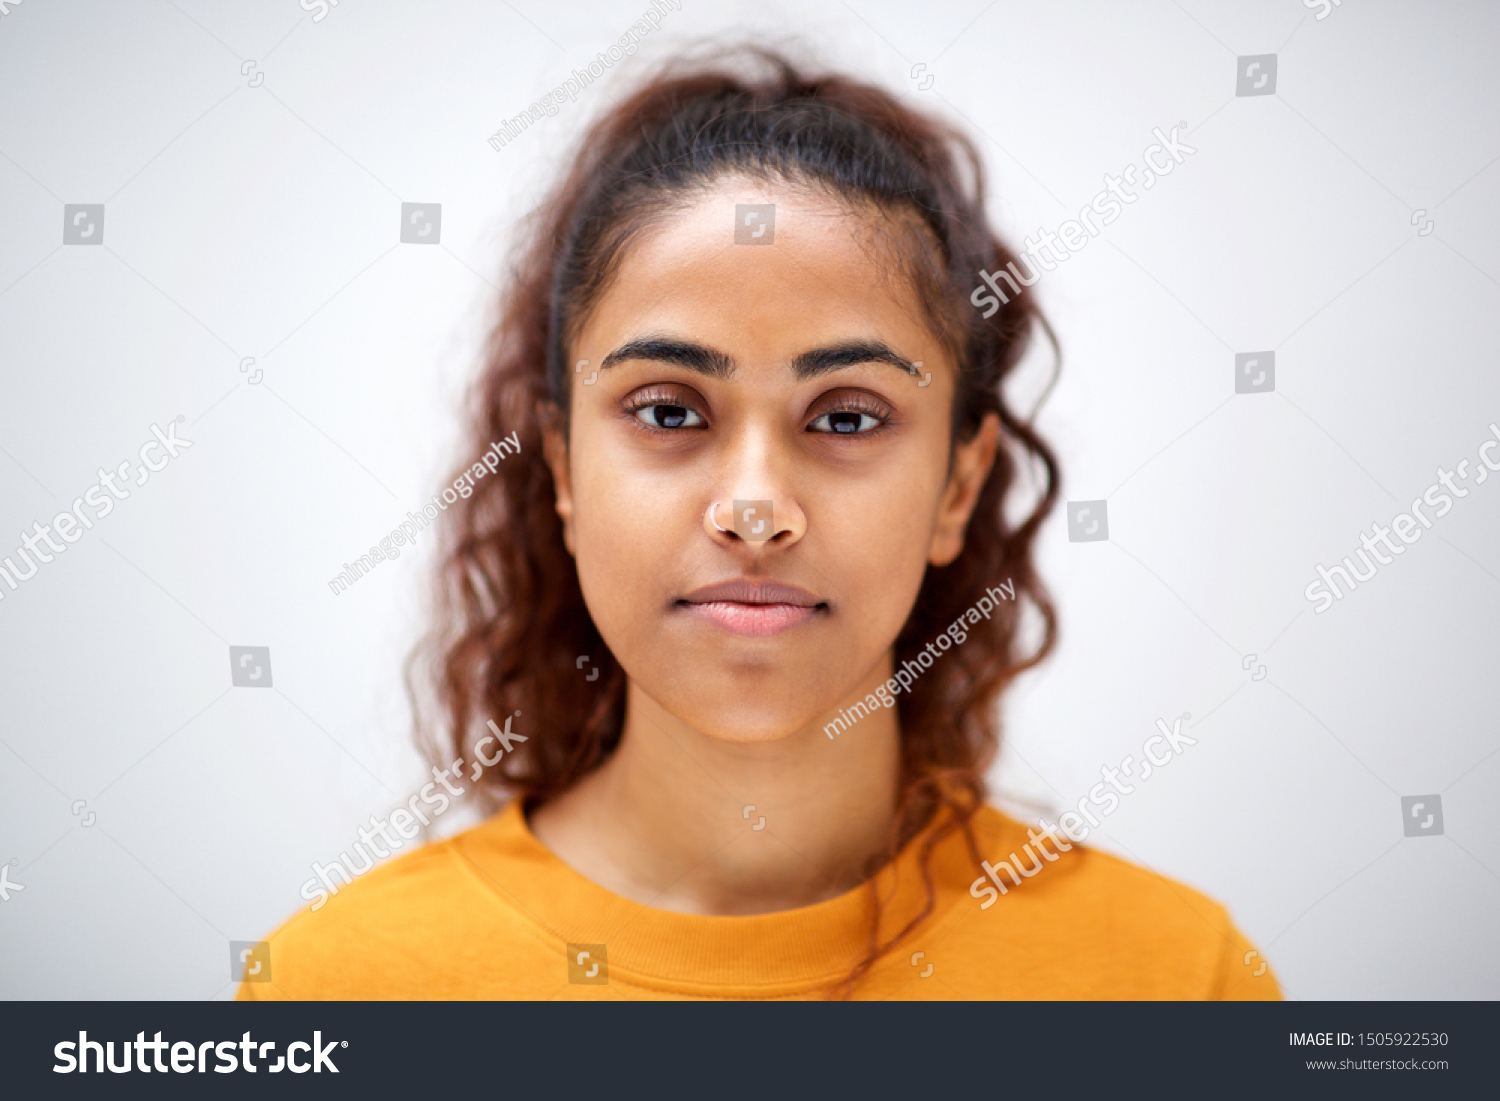 Close up horizontal front portrait of attractive young indian woman with serious expression on face #1505922530